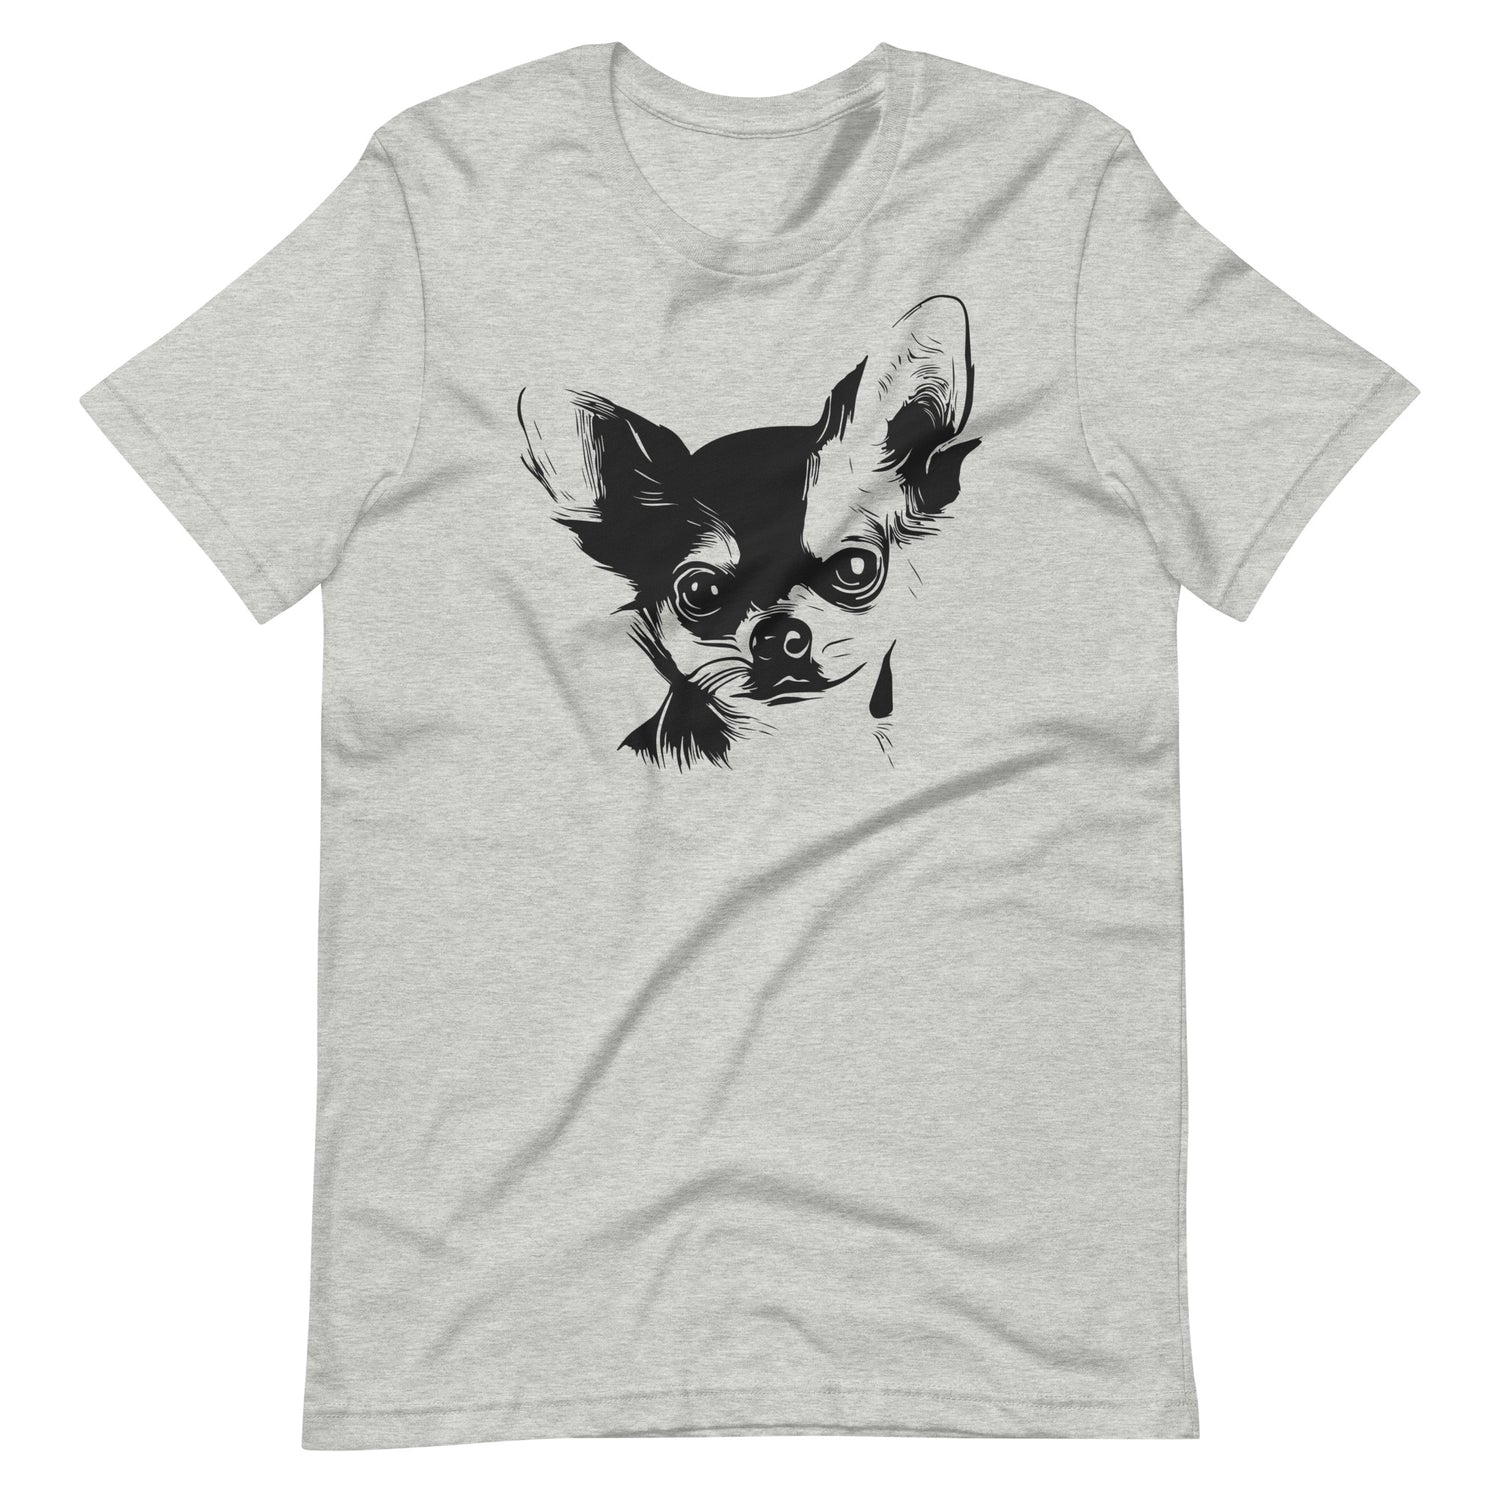 Black Chihuahua face silhouette on unisex athletic heather t-shirt